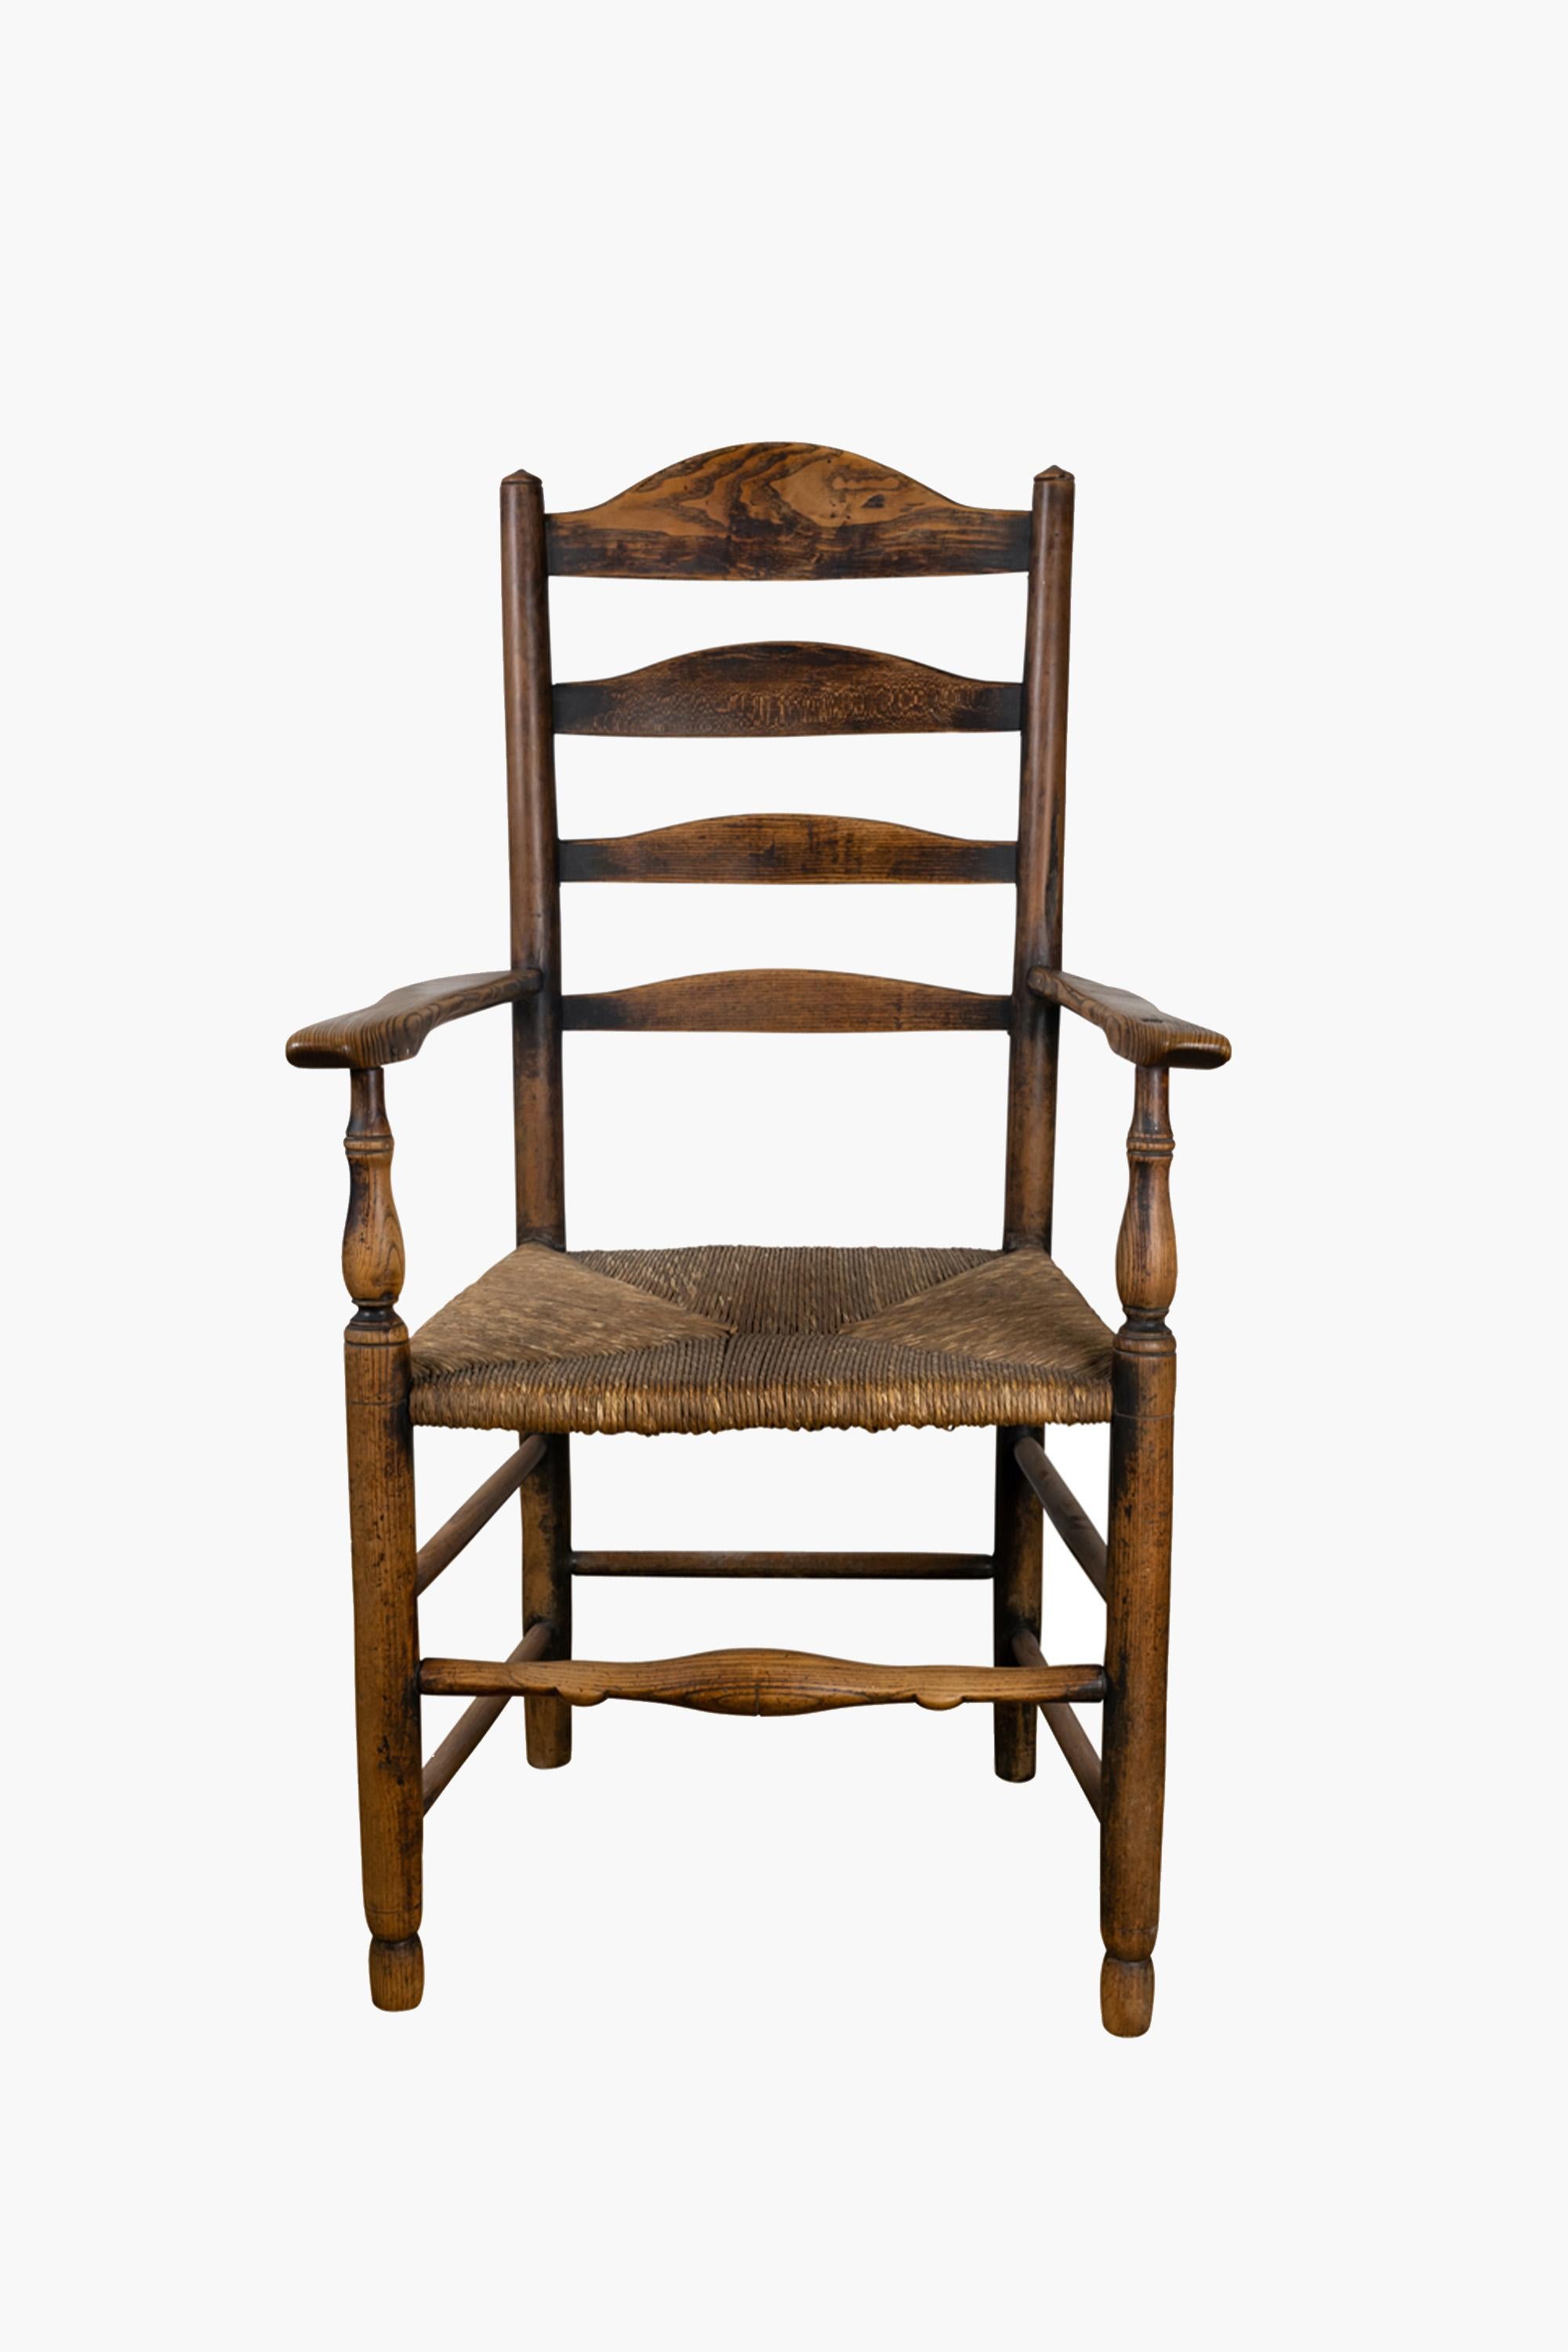 English Ladder back armchair, Early 19th Century

A country-made early 19th century ladder back armchair. Made in Ash with great patina and original rush seat.

A proper hand-made chair, which has taken on a fabulous shape and patina with age.